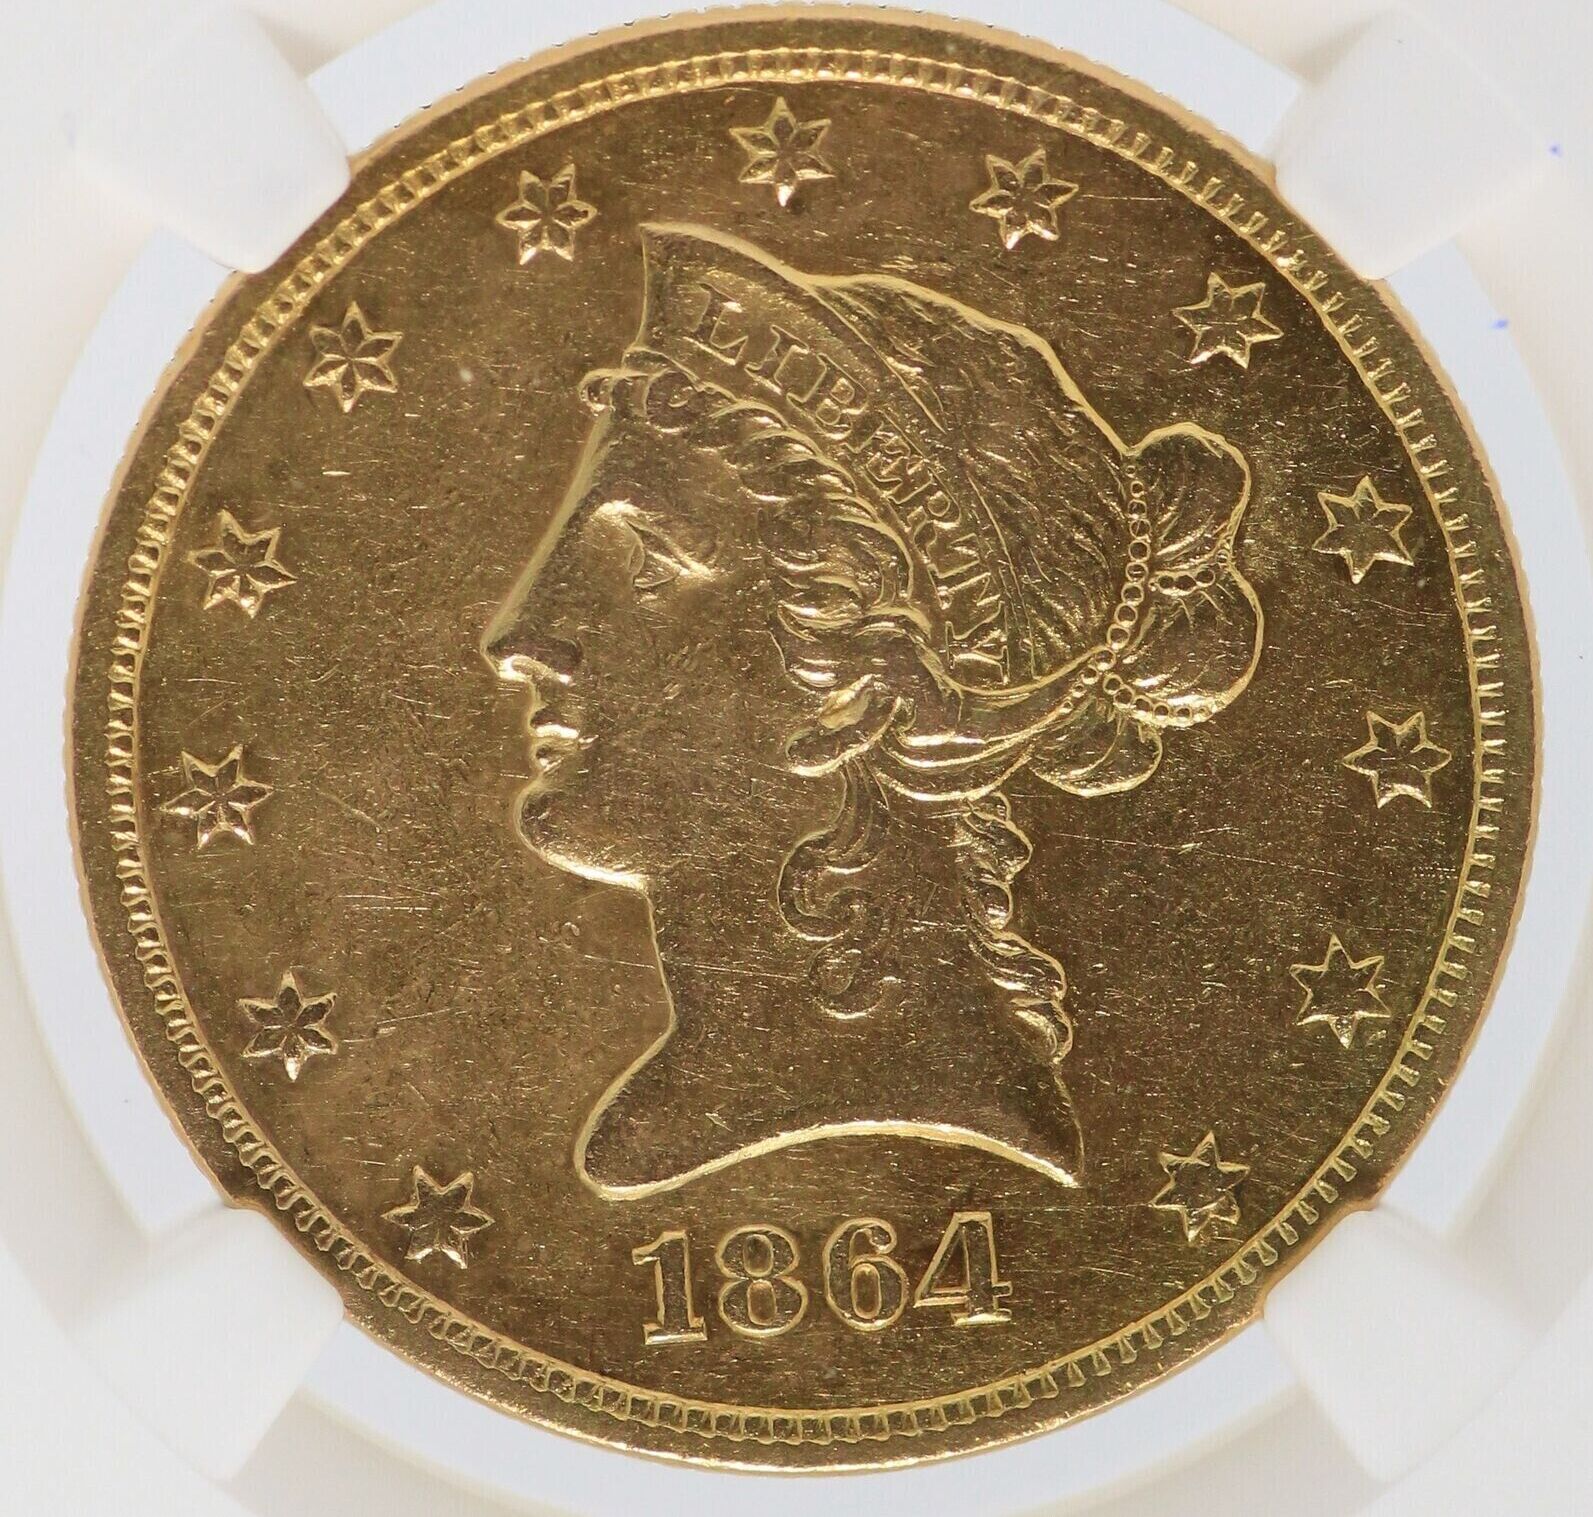 USA $10 Gold 1864-S Liberty NGC AU Details Certified Coin